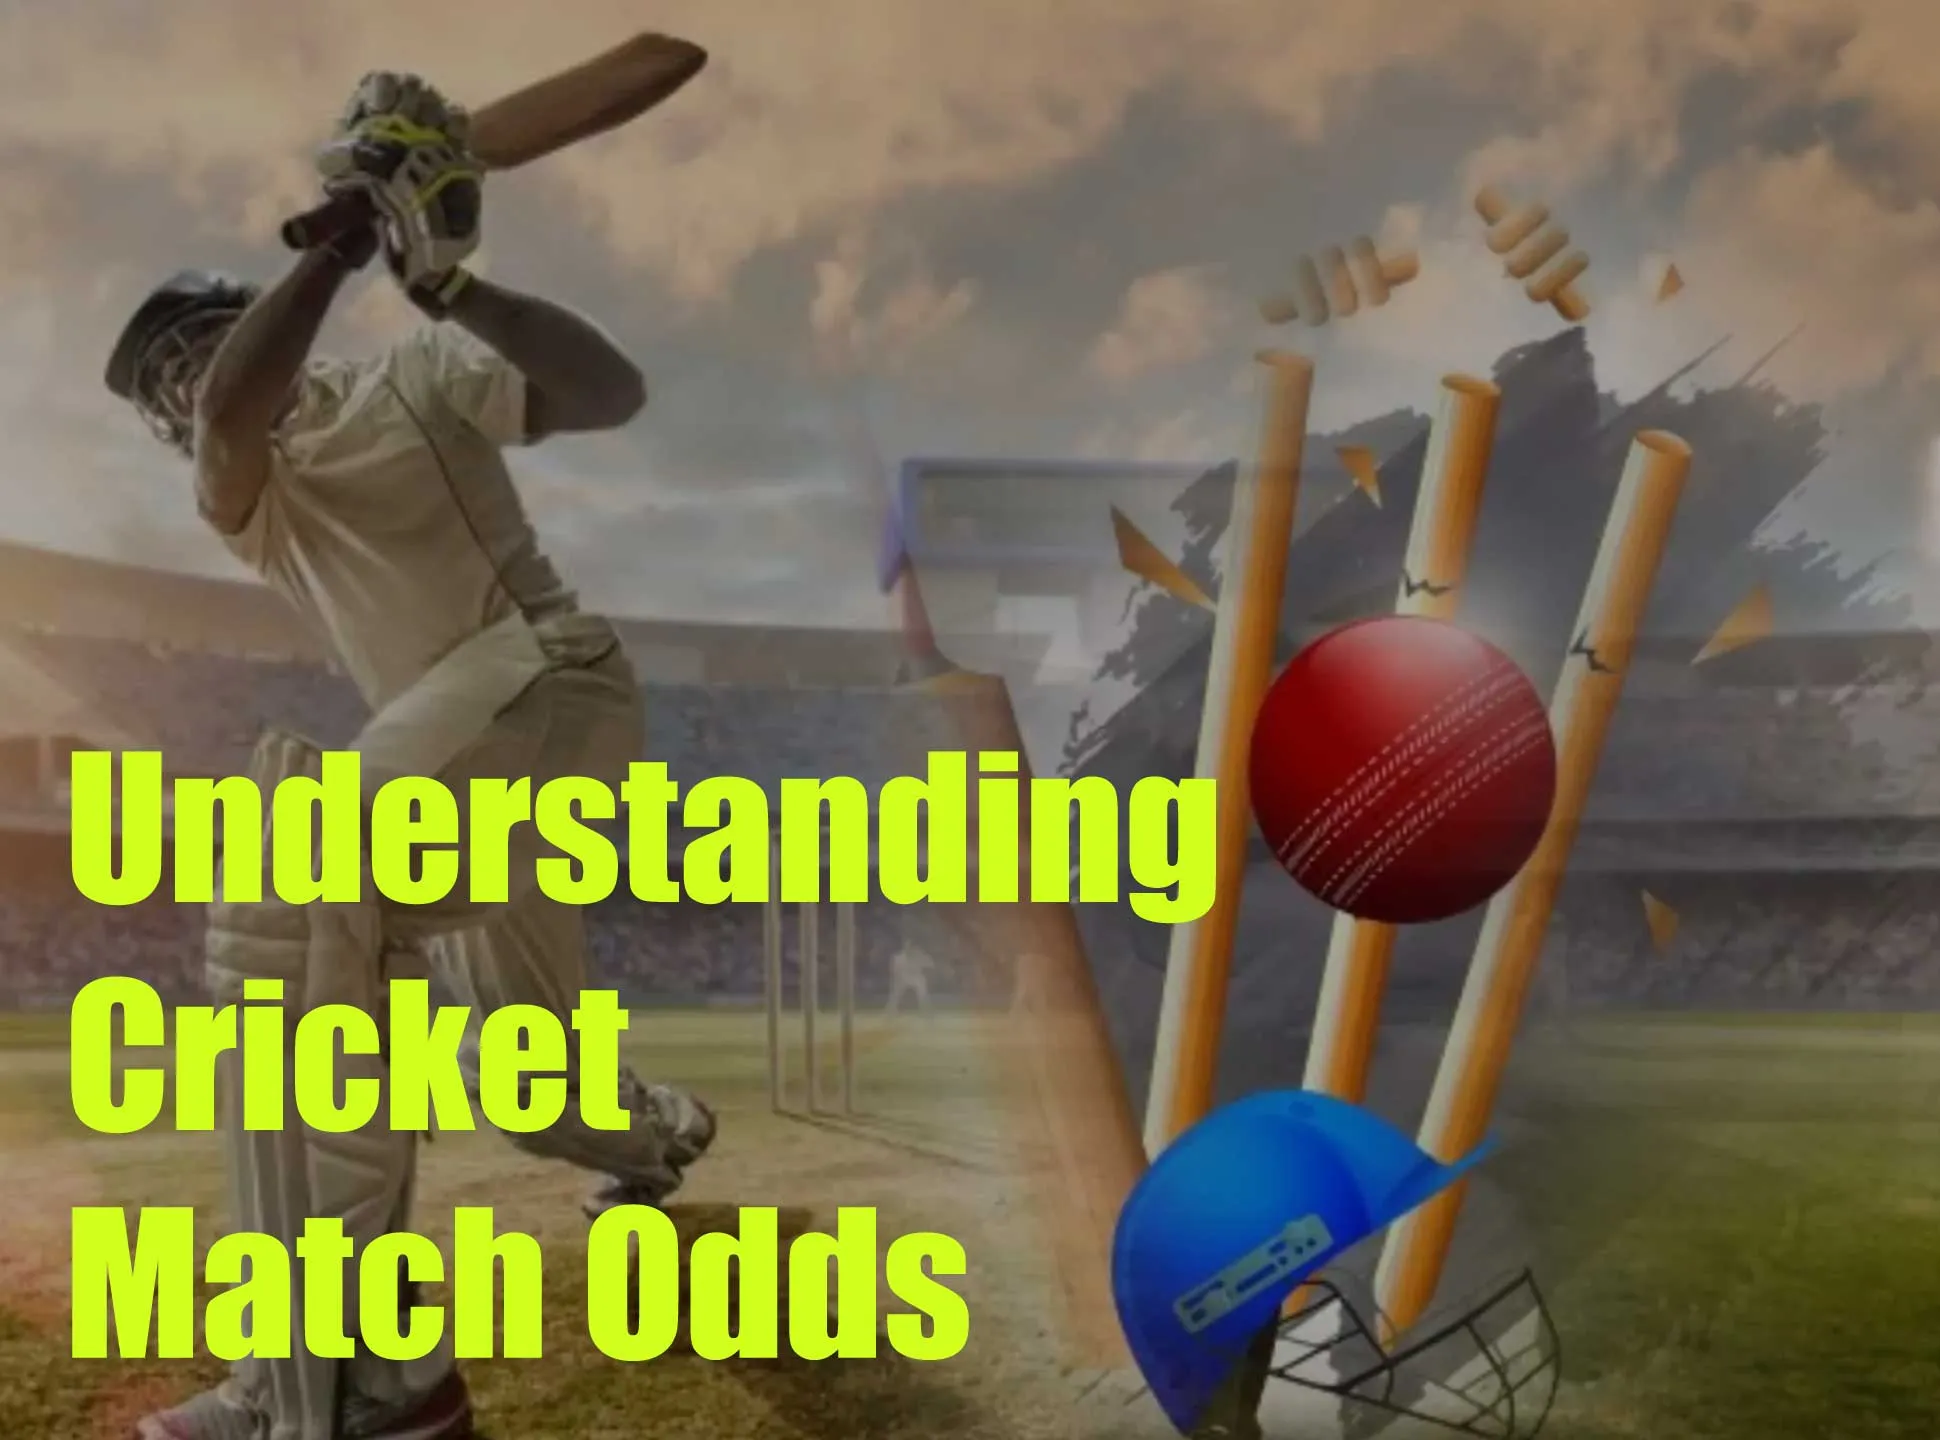 A small guide on how to understand cricket match odds and make successful online bets.